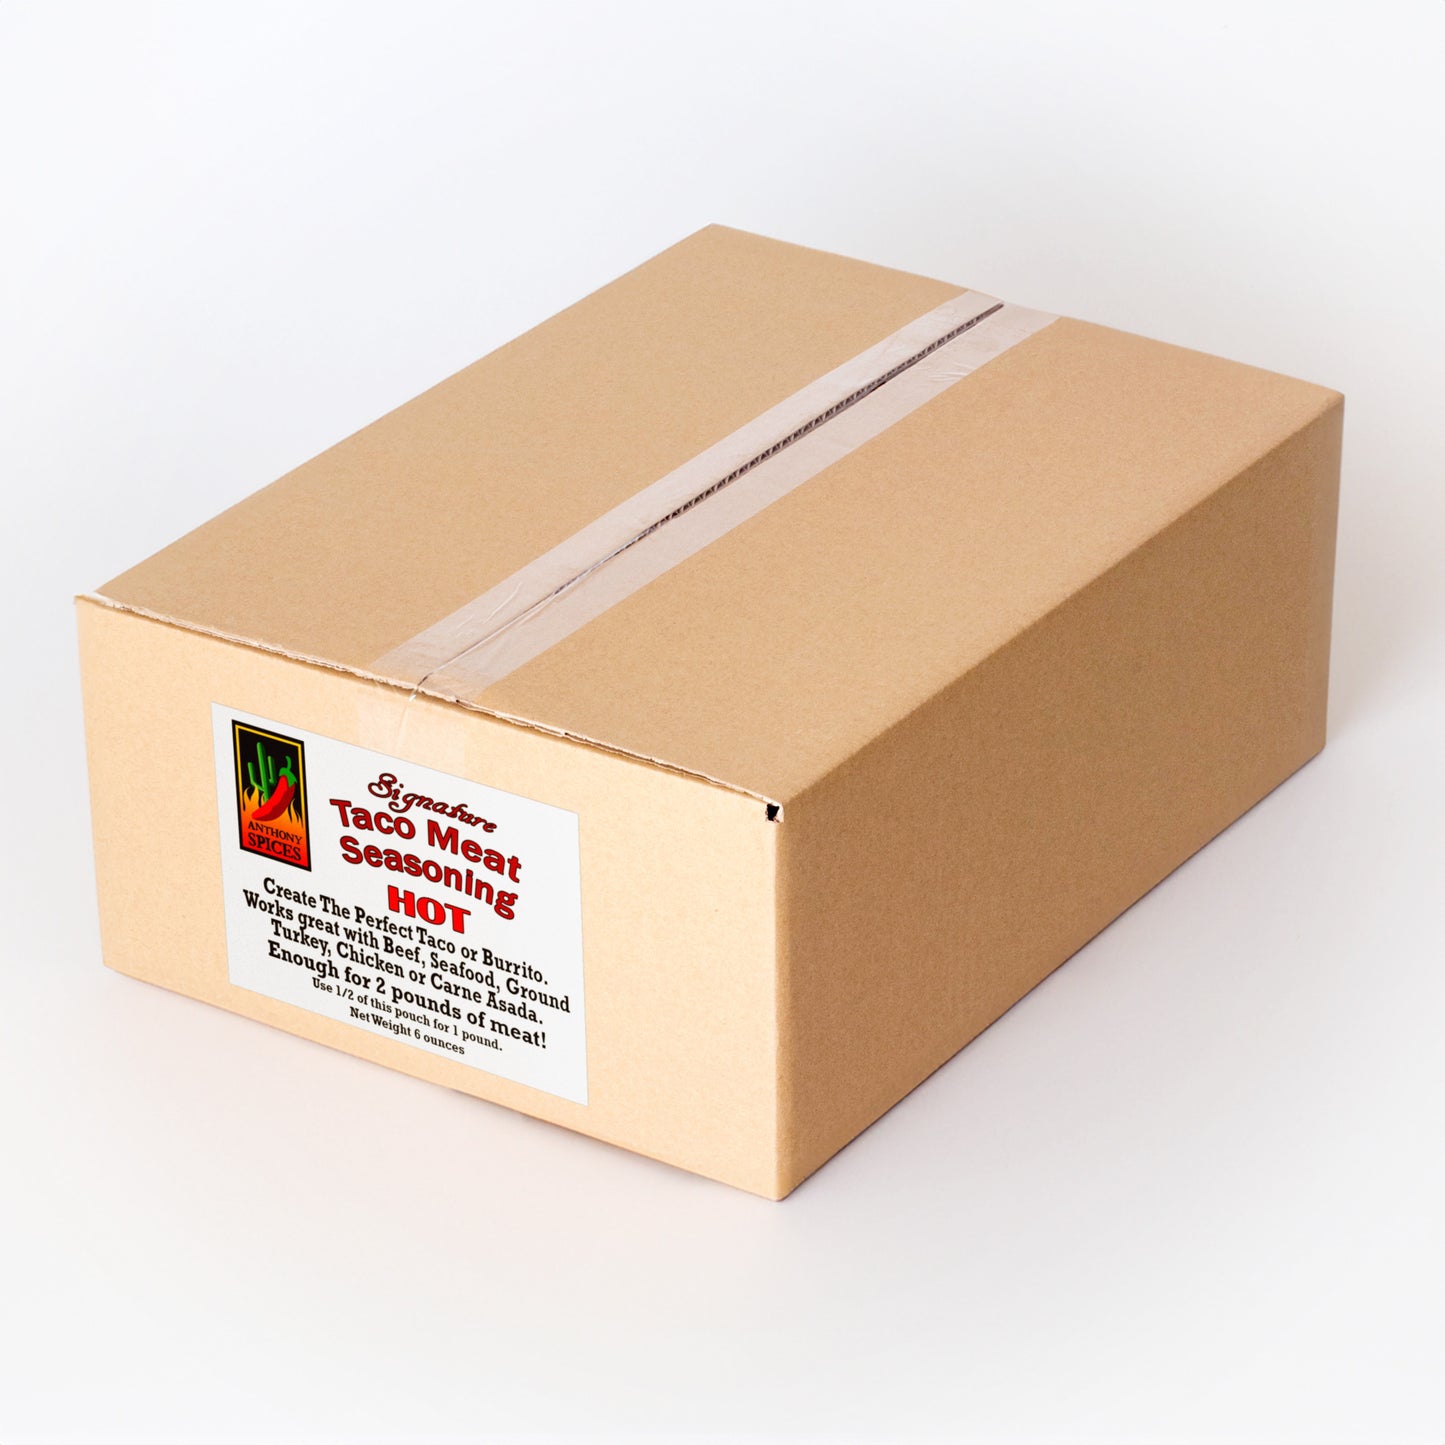 Case of 12 (6oz Bags) of Hot Taco Seasoning - Closed shipping box with label